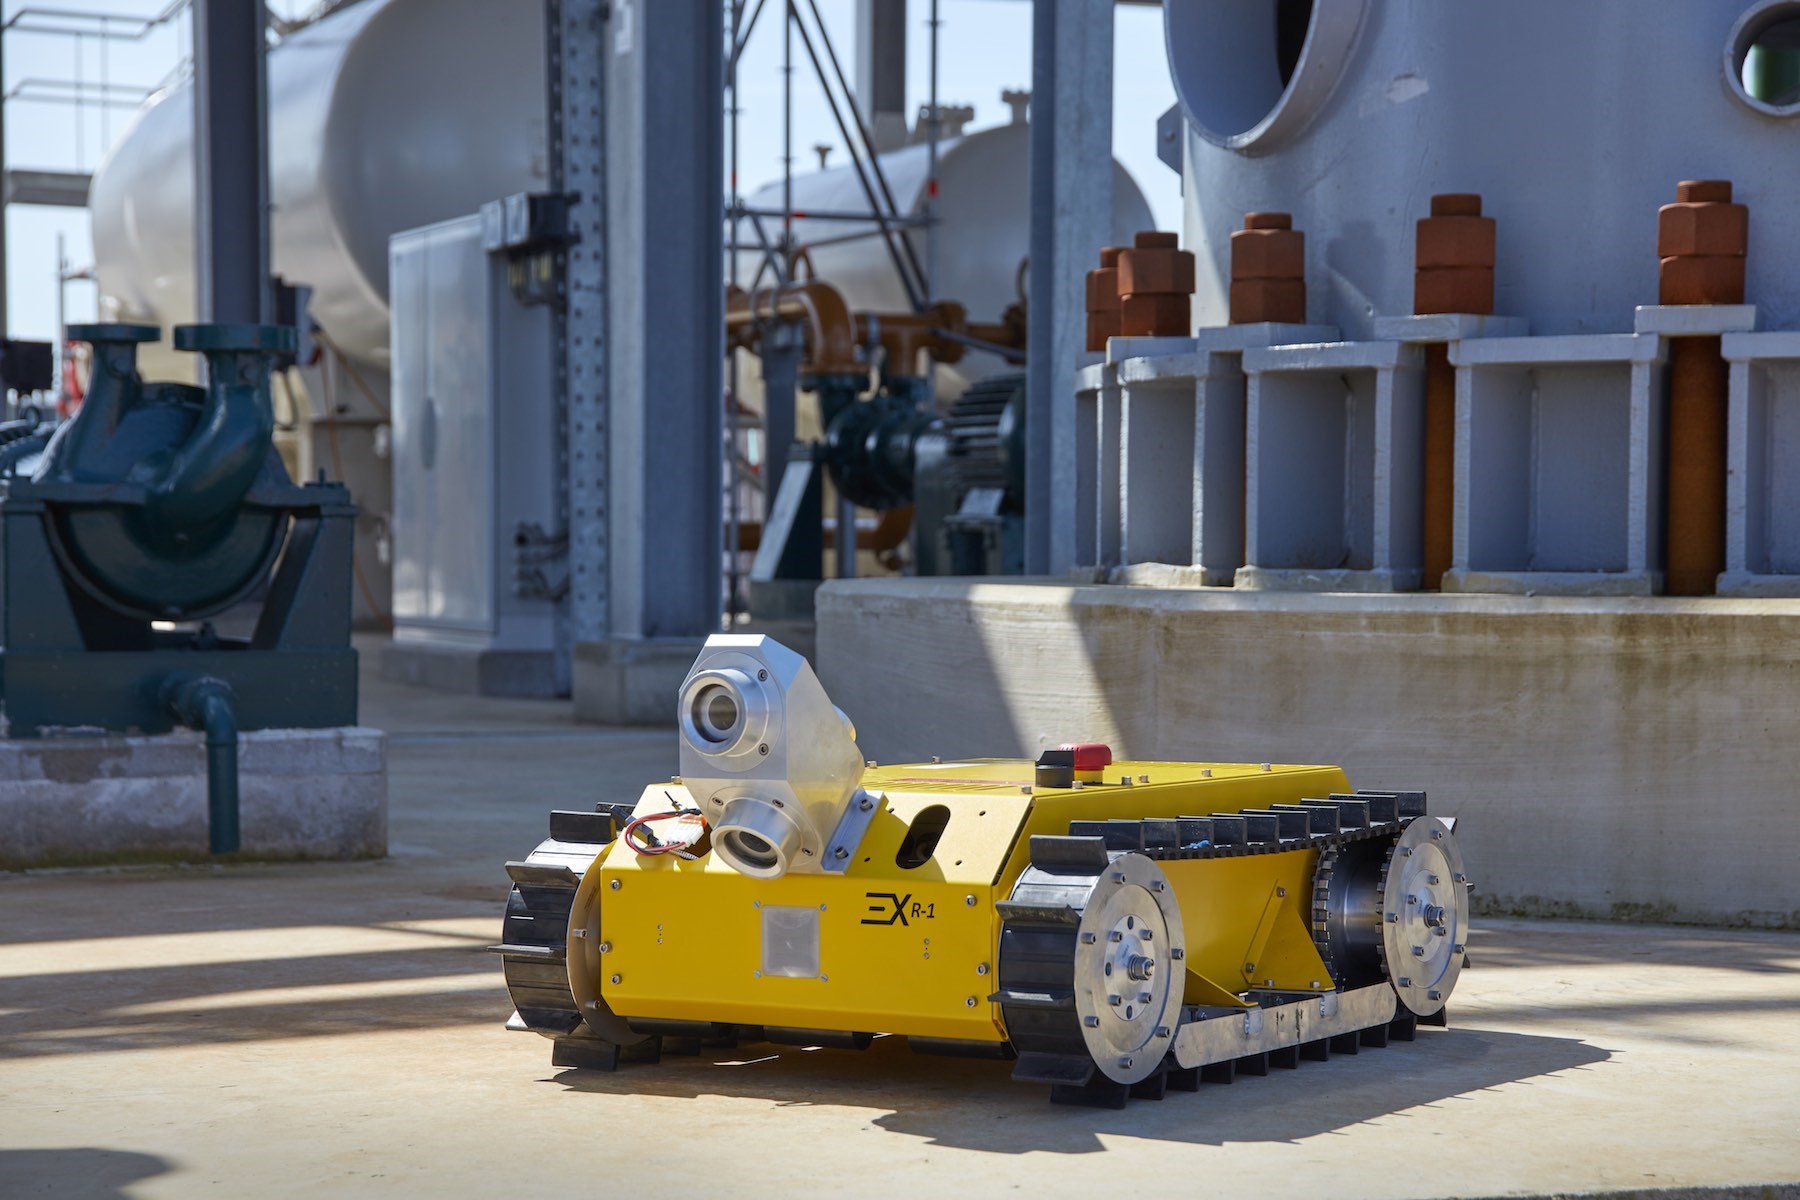 IDS Provides 'Robot Eyes' for Potentially Explosive Environments